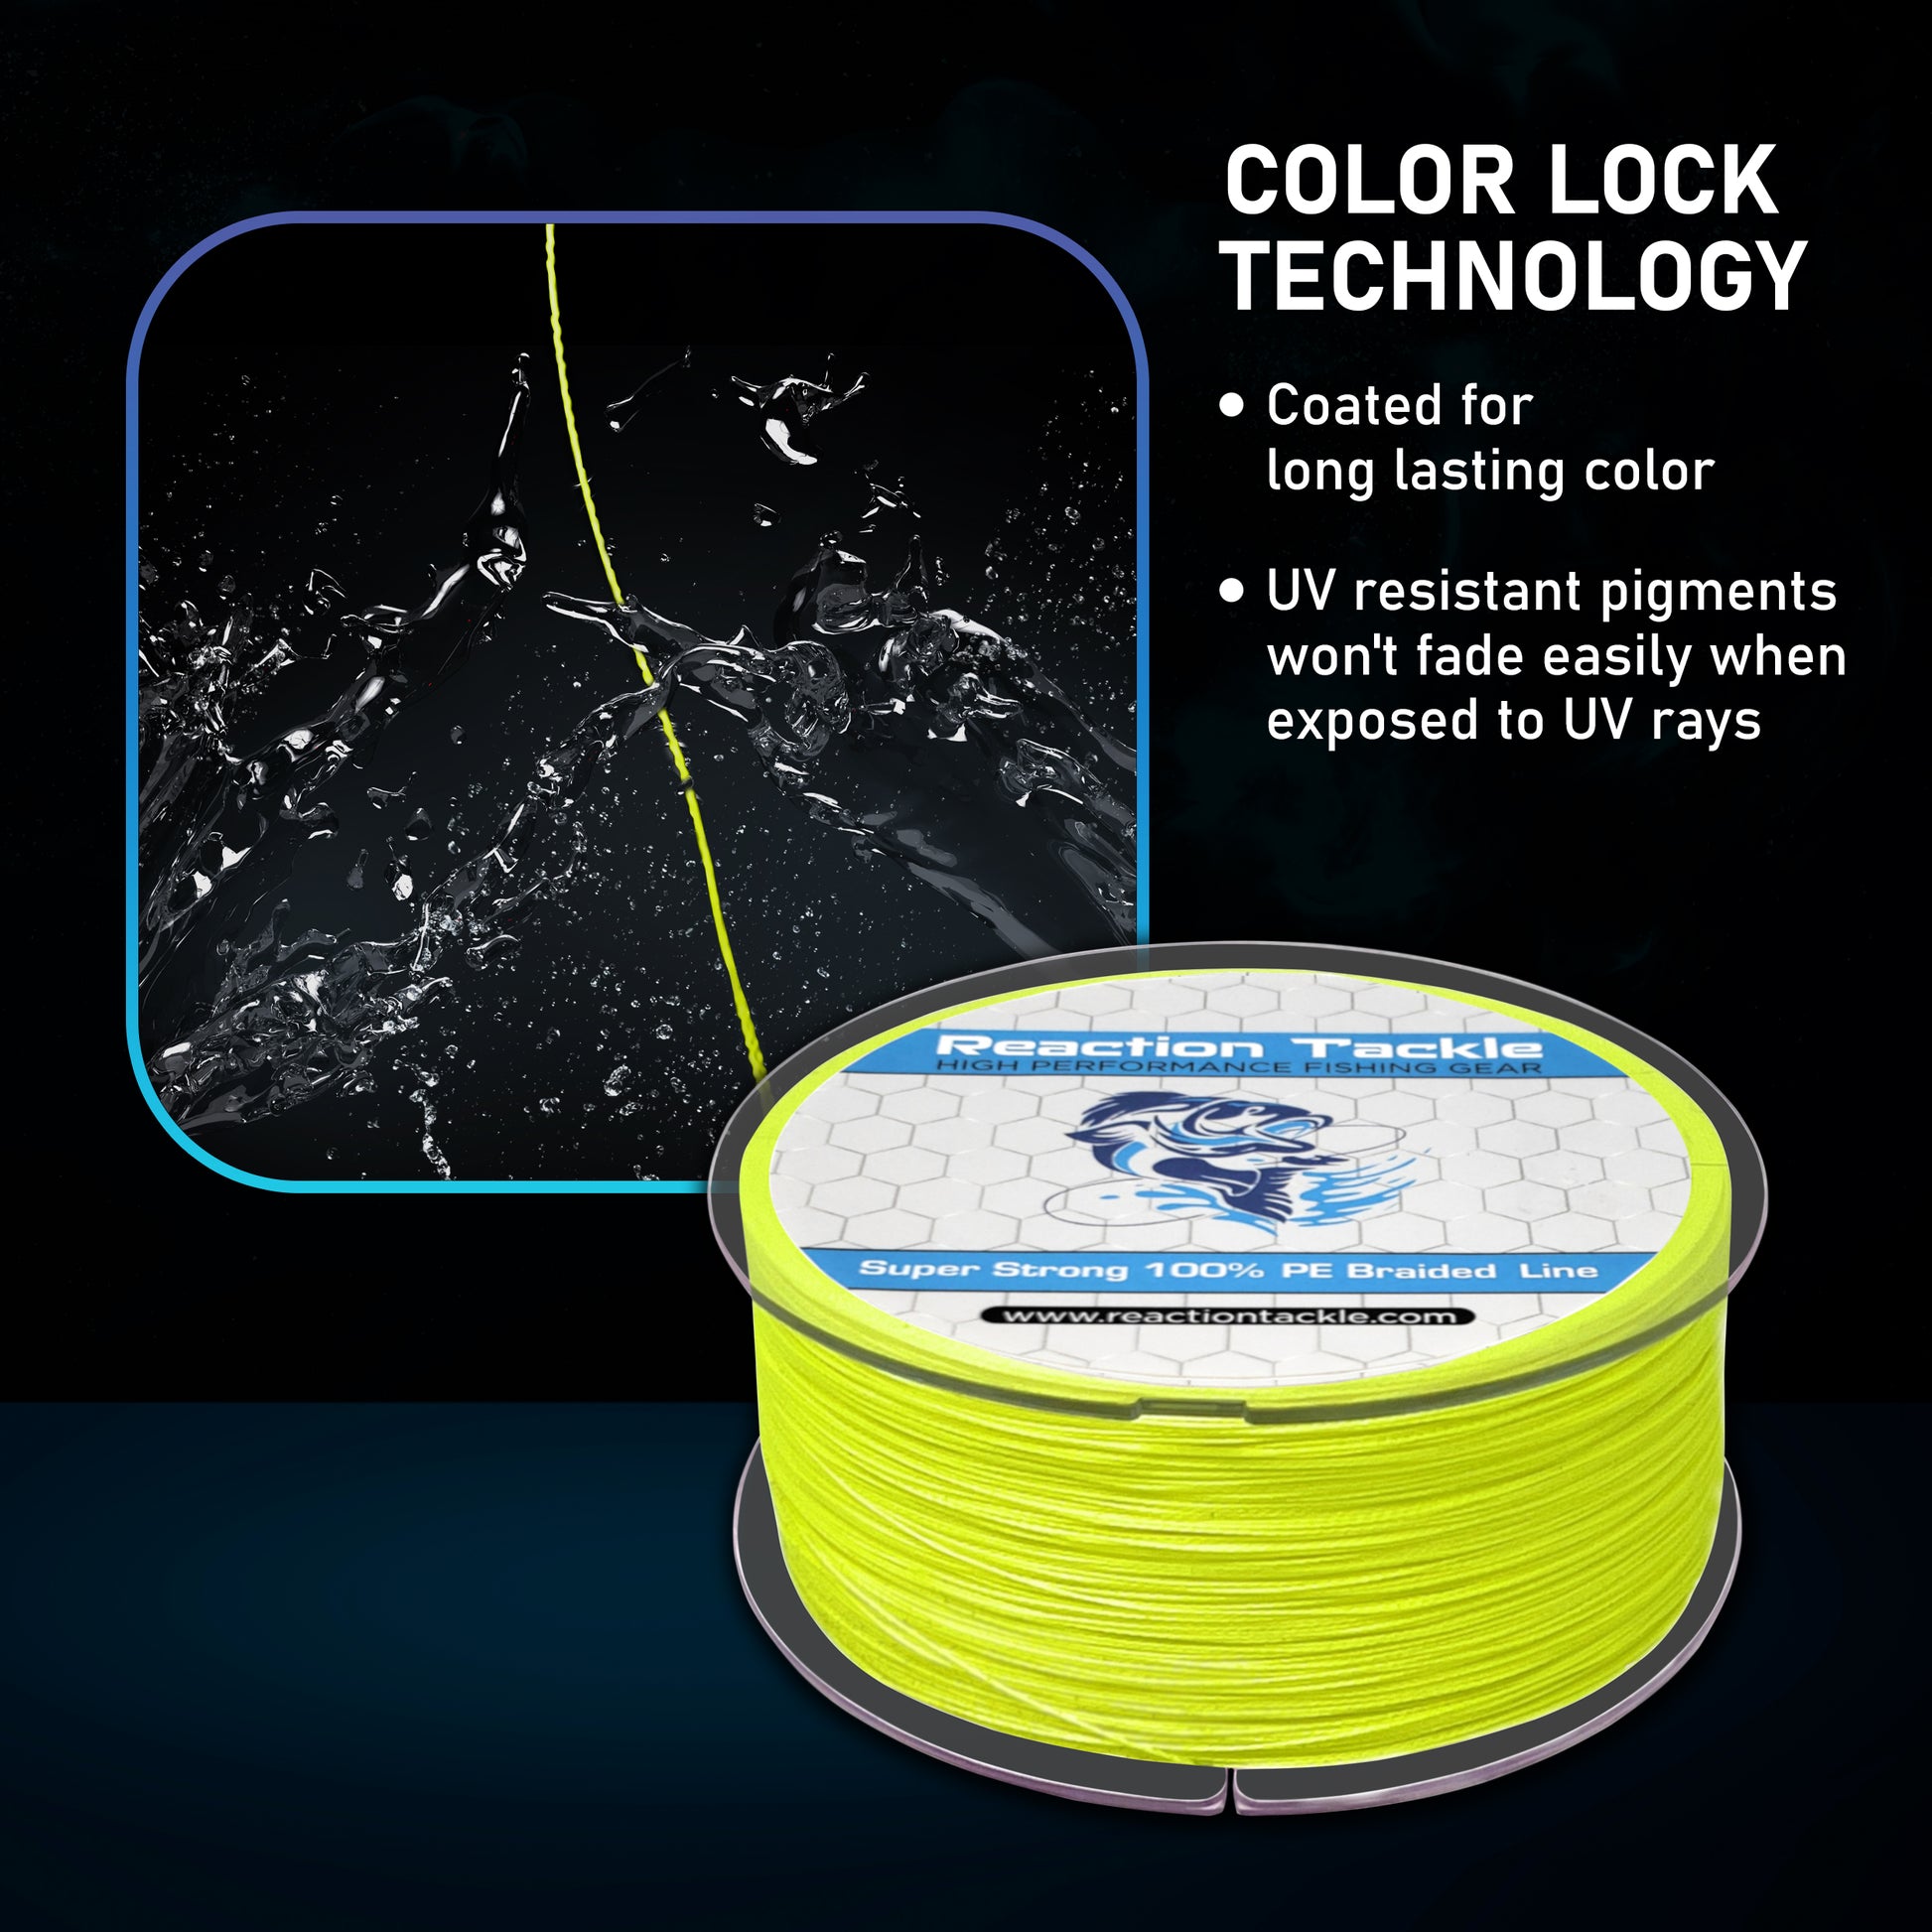 Reaction Tackle Braided Fishing Line Green Camouflage 4 and 8 Strand Braid